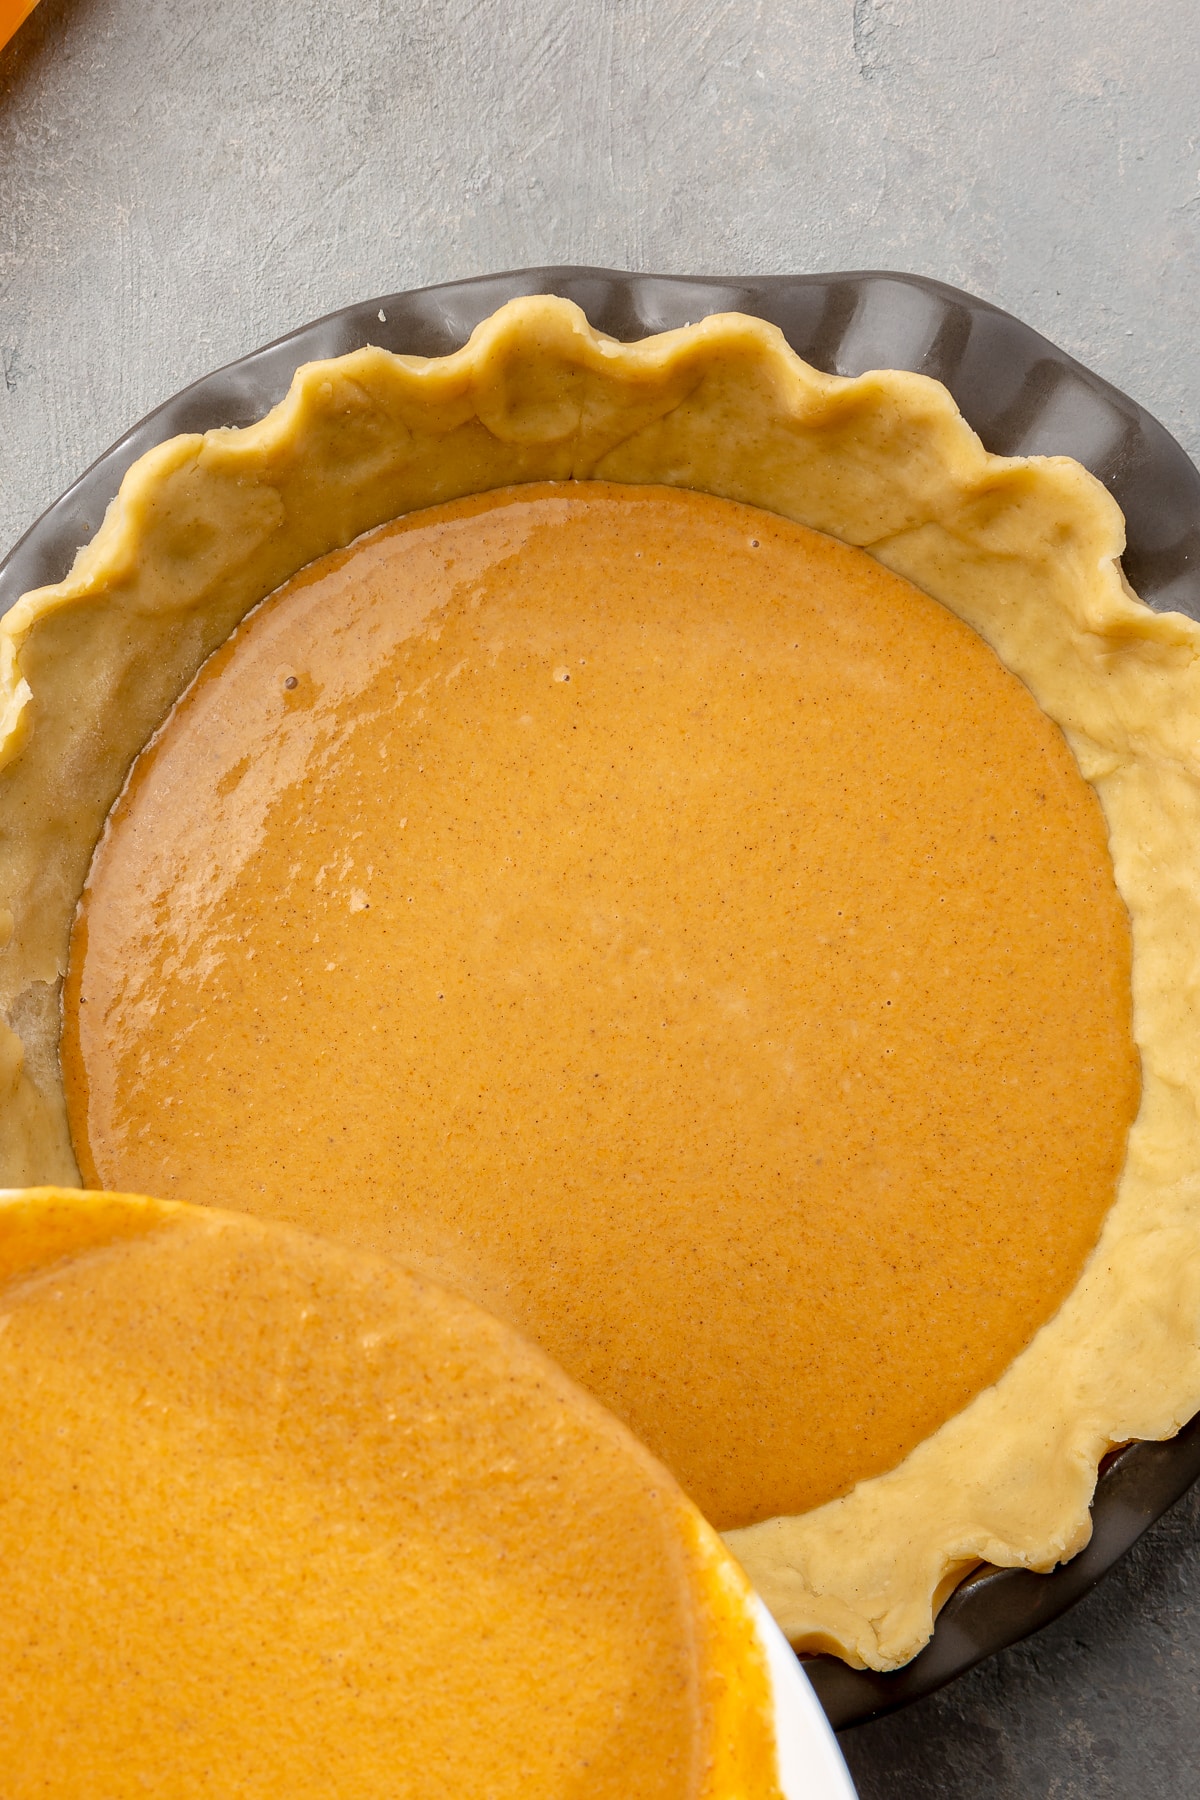 The light orange pumpkin mixture is shown being poured over the raw pie crust in the metal pie dish.